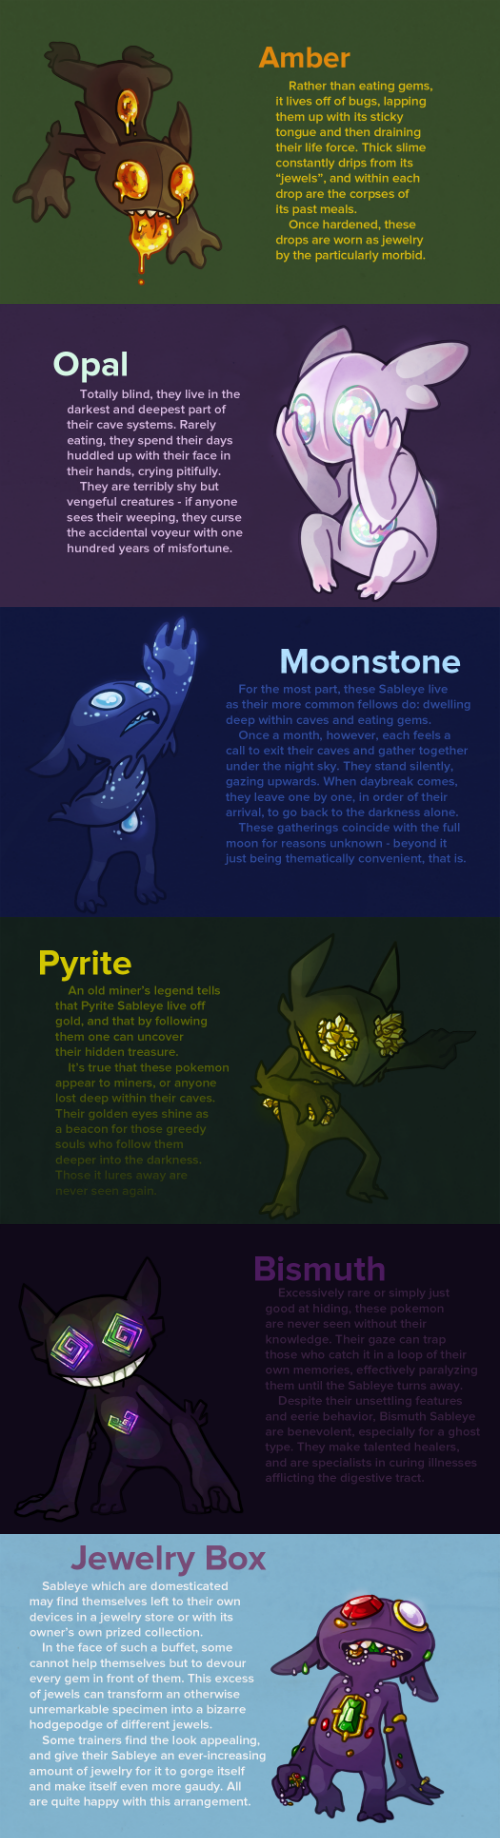 What If Sableye Subspecies Were Based on Different Gems?